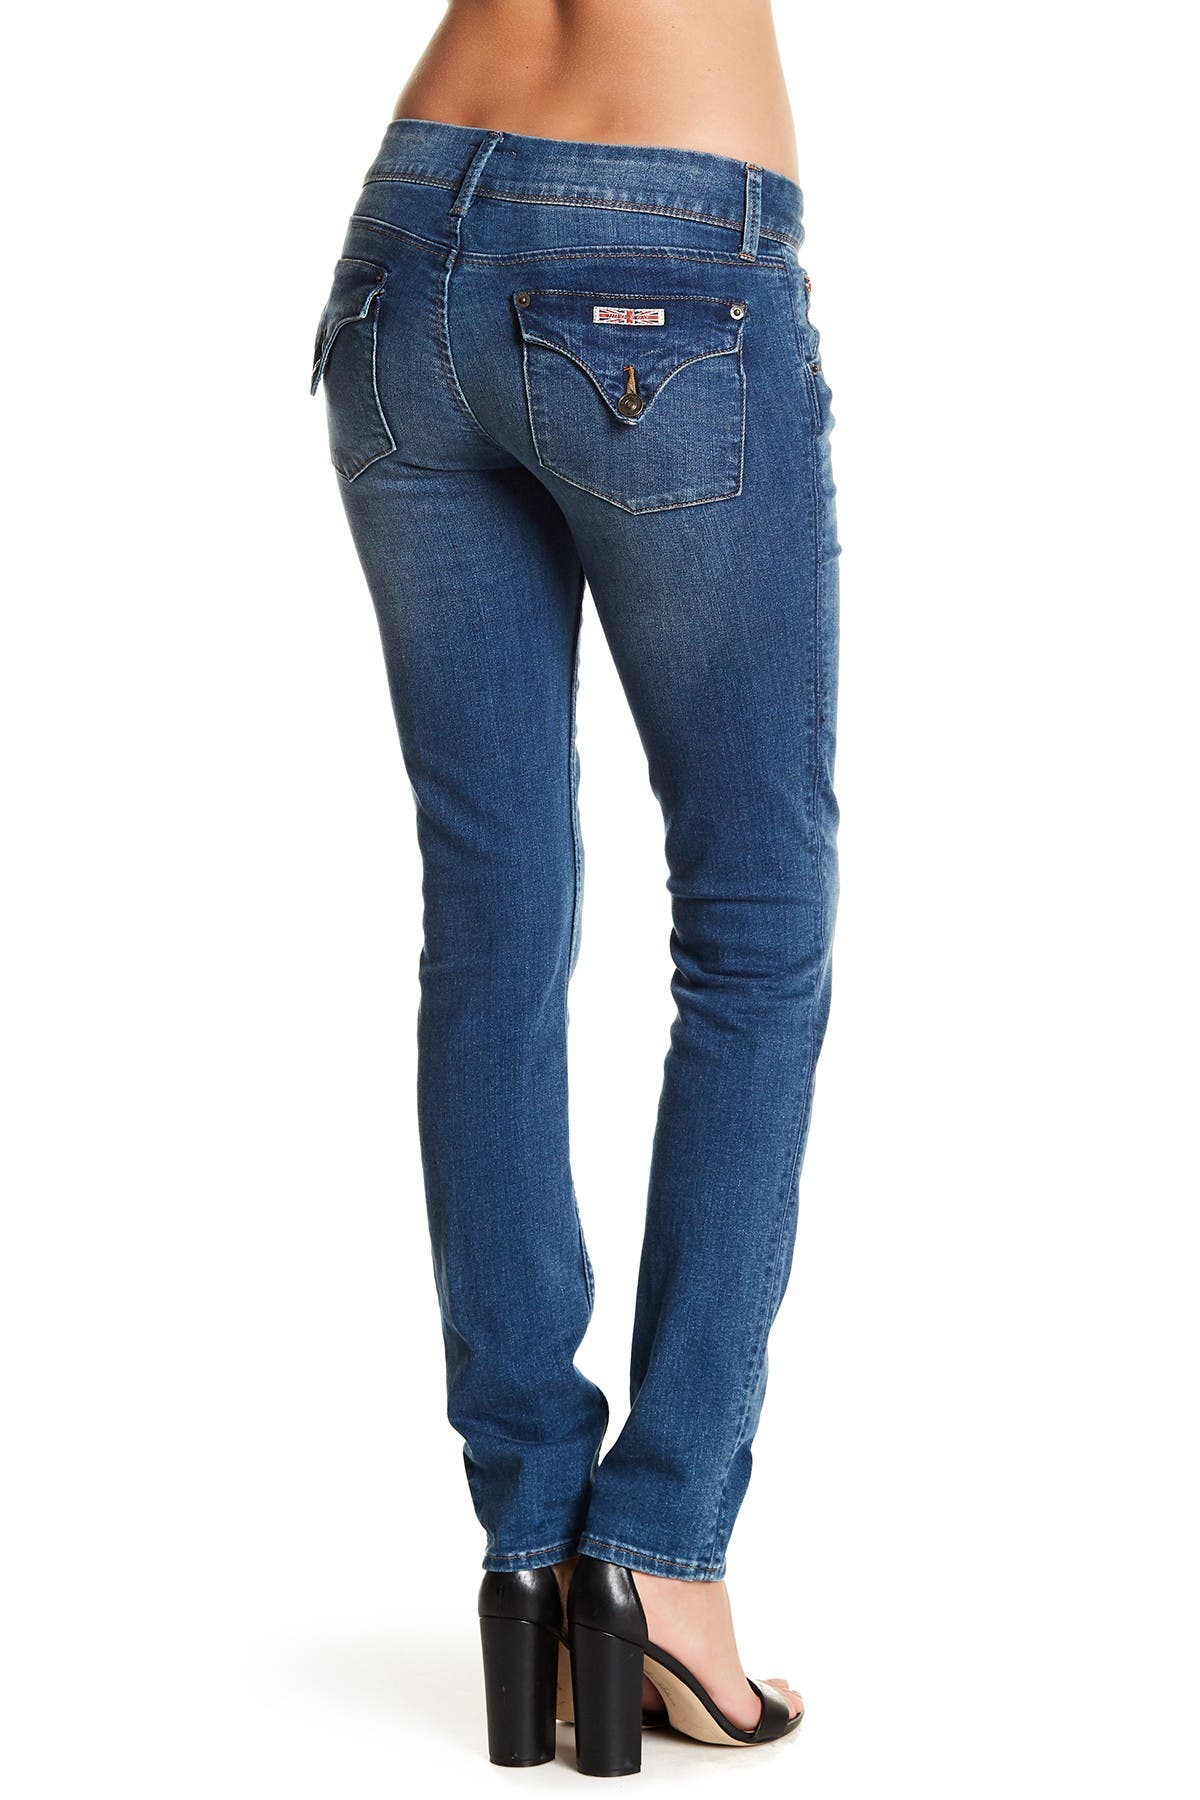 womens skinny jeans with back flap pockets